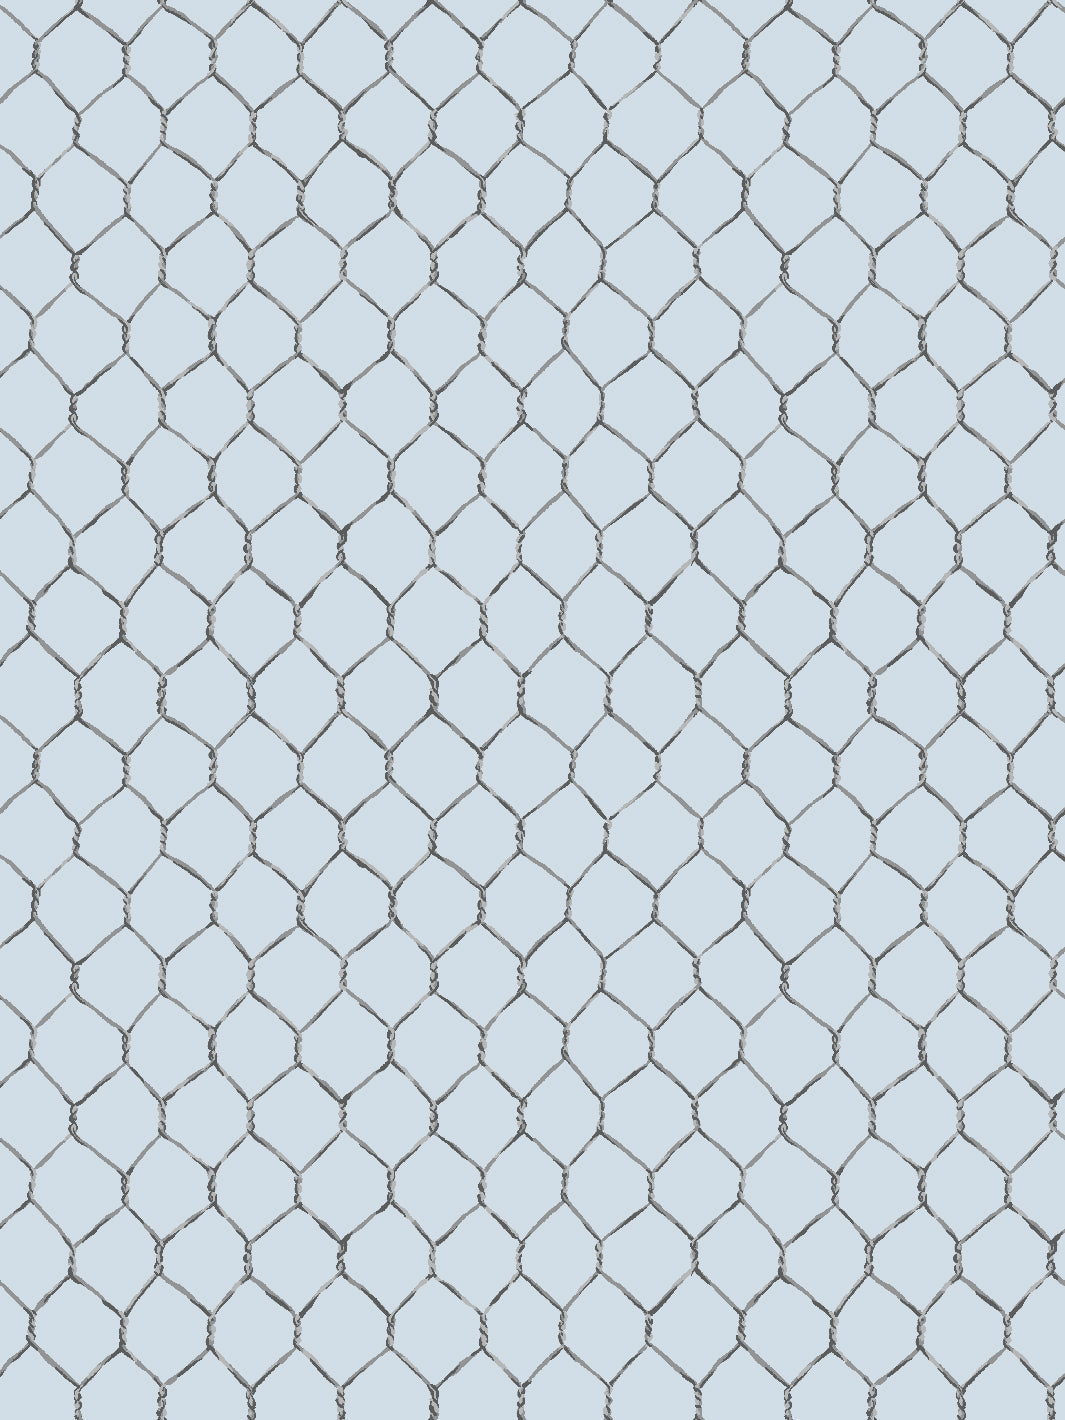 'Evelyn's Chicken Wire' Wallpaper by Sarah Jessica Parker - Metal on Misty Blue